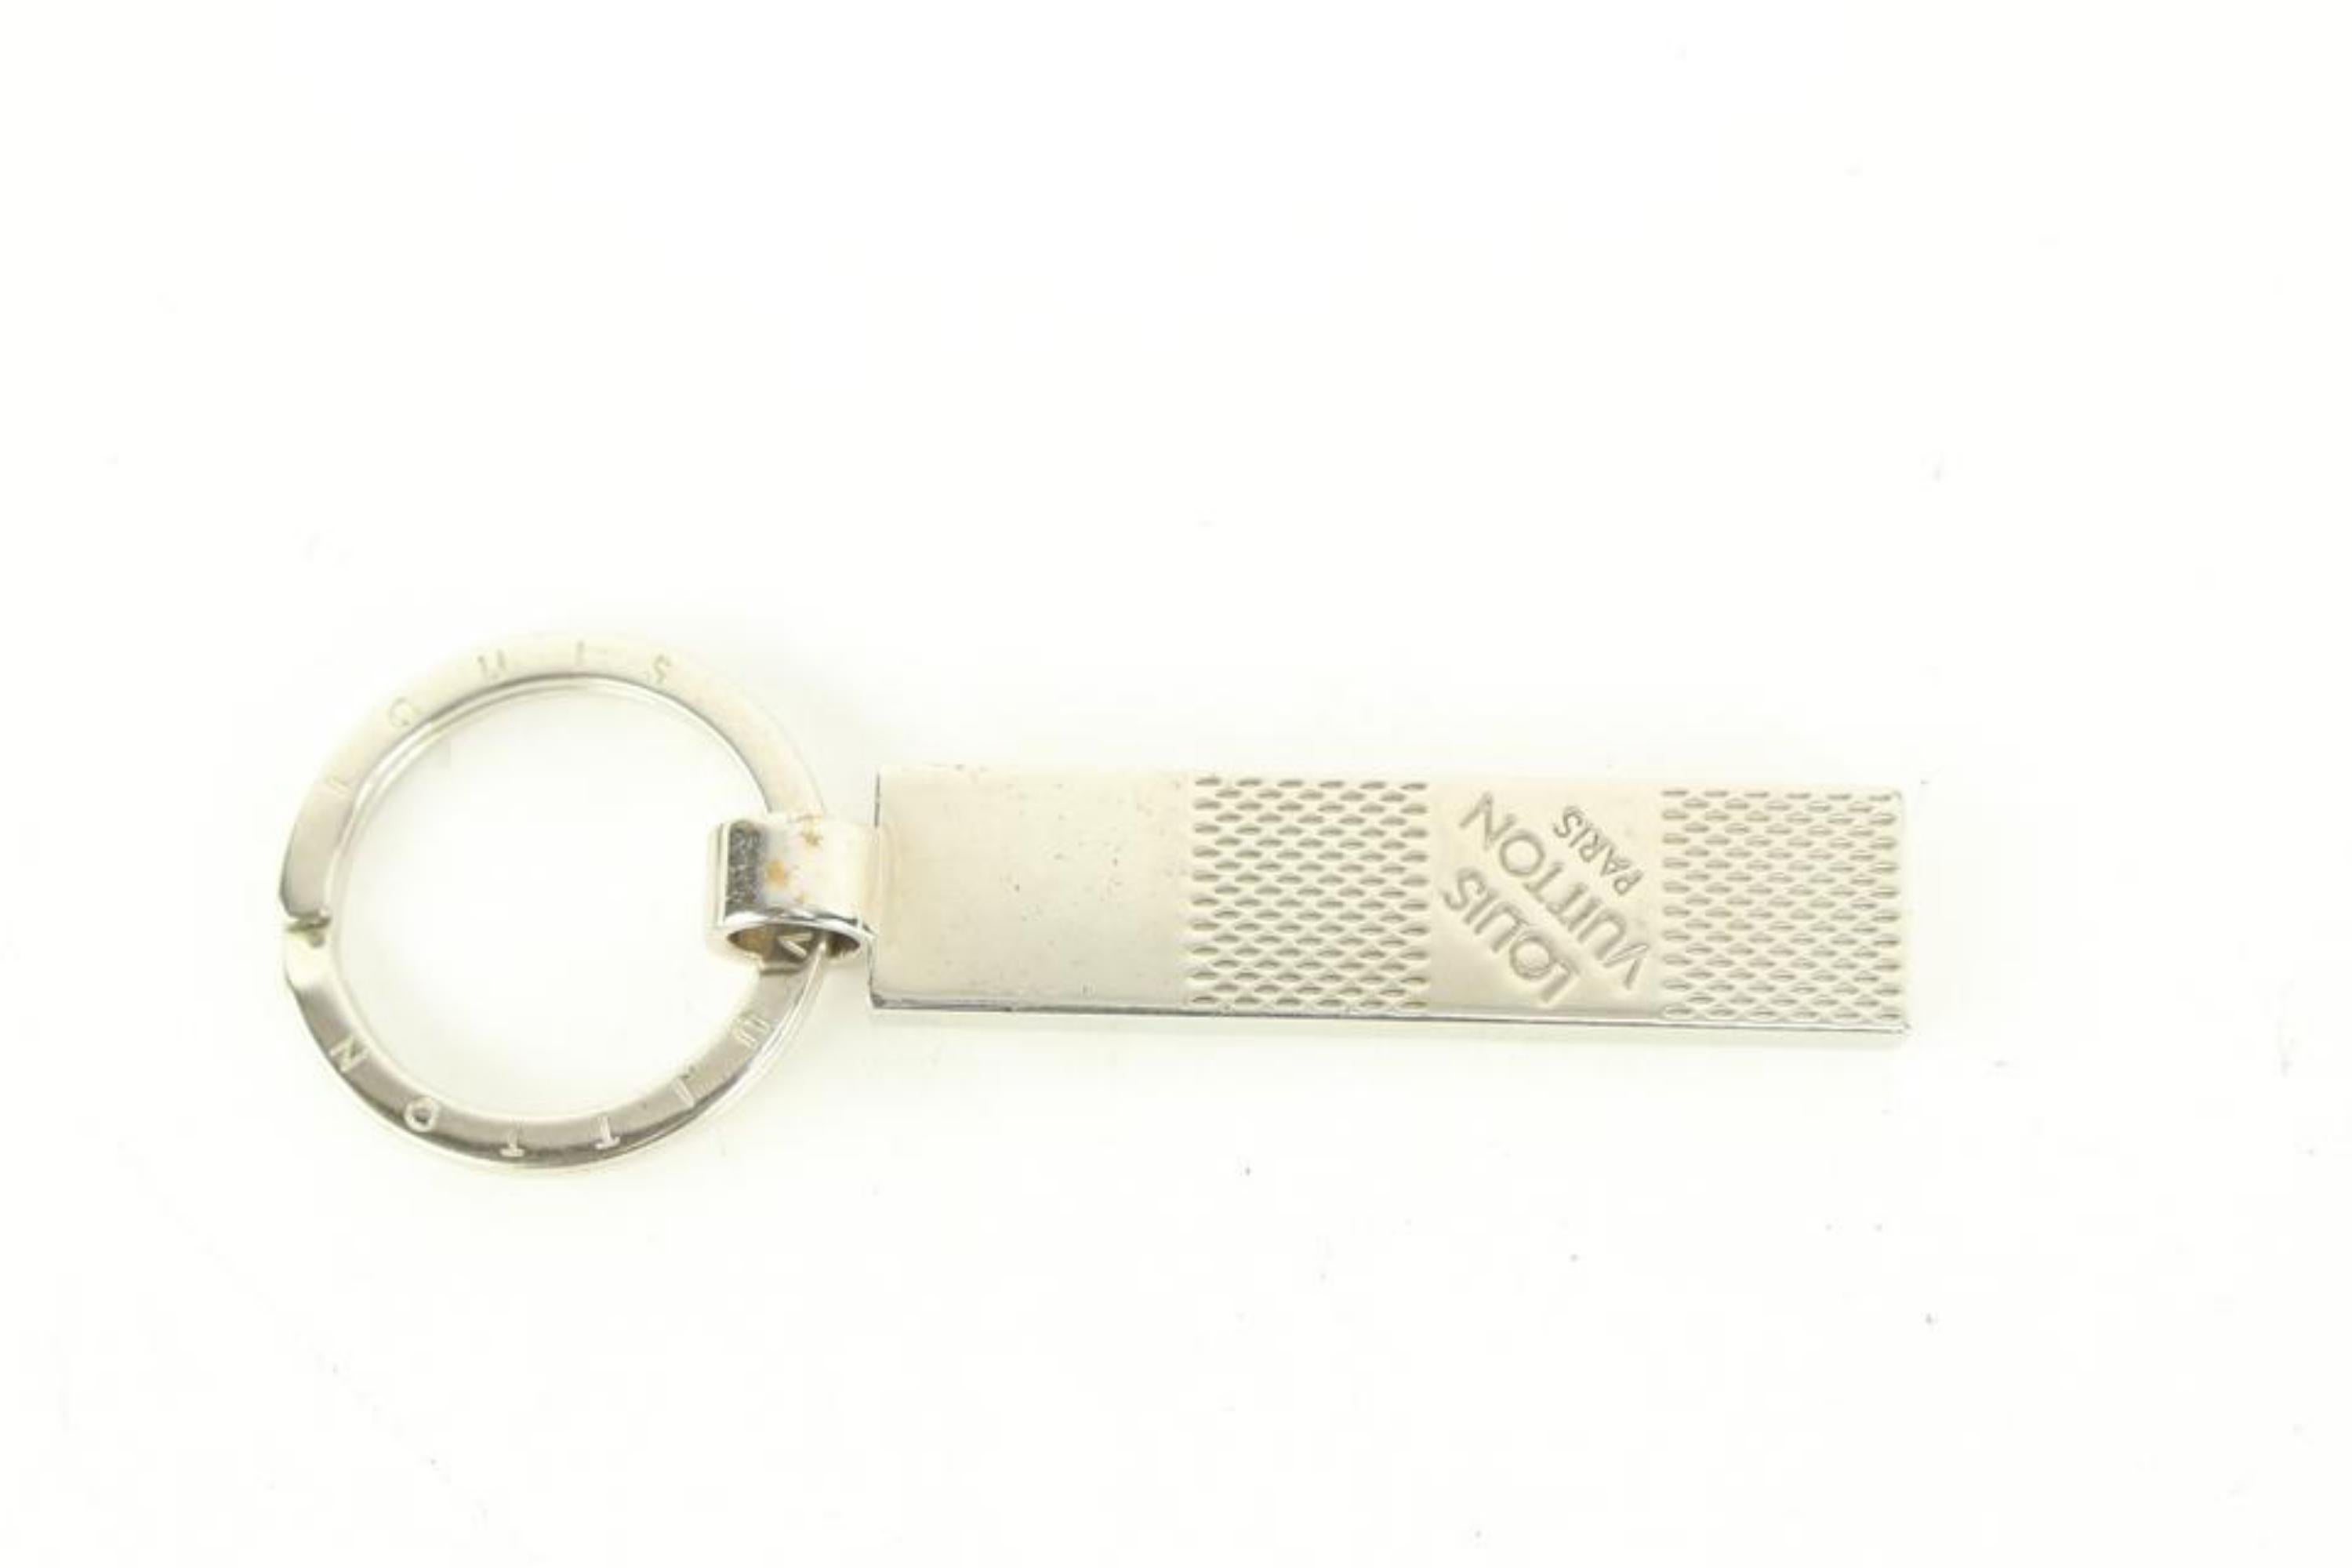 Louis Vuitton M67918 Silver Damier Keychain Keyring Key Charm Pendant 80lk52s In Fair Condition For Sale In Dix hills, NY